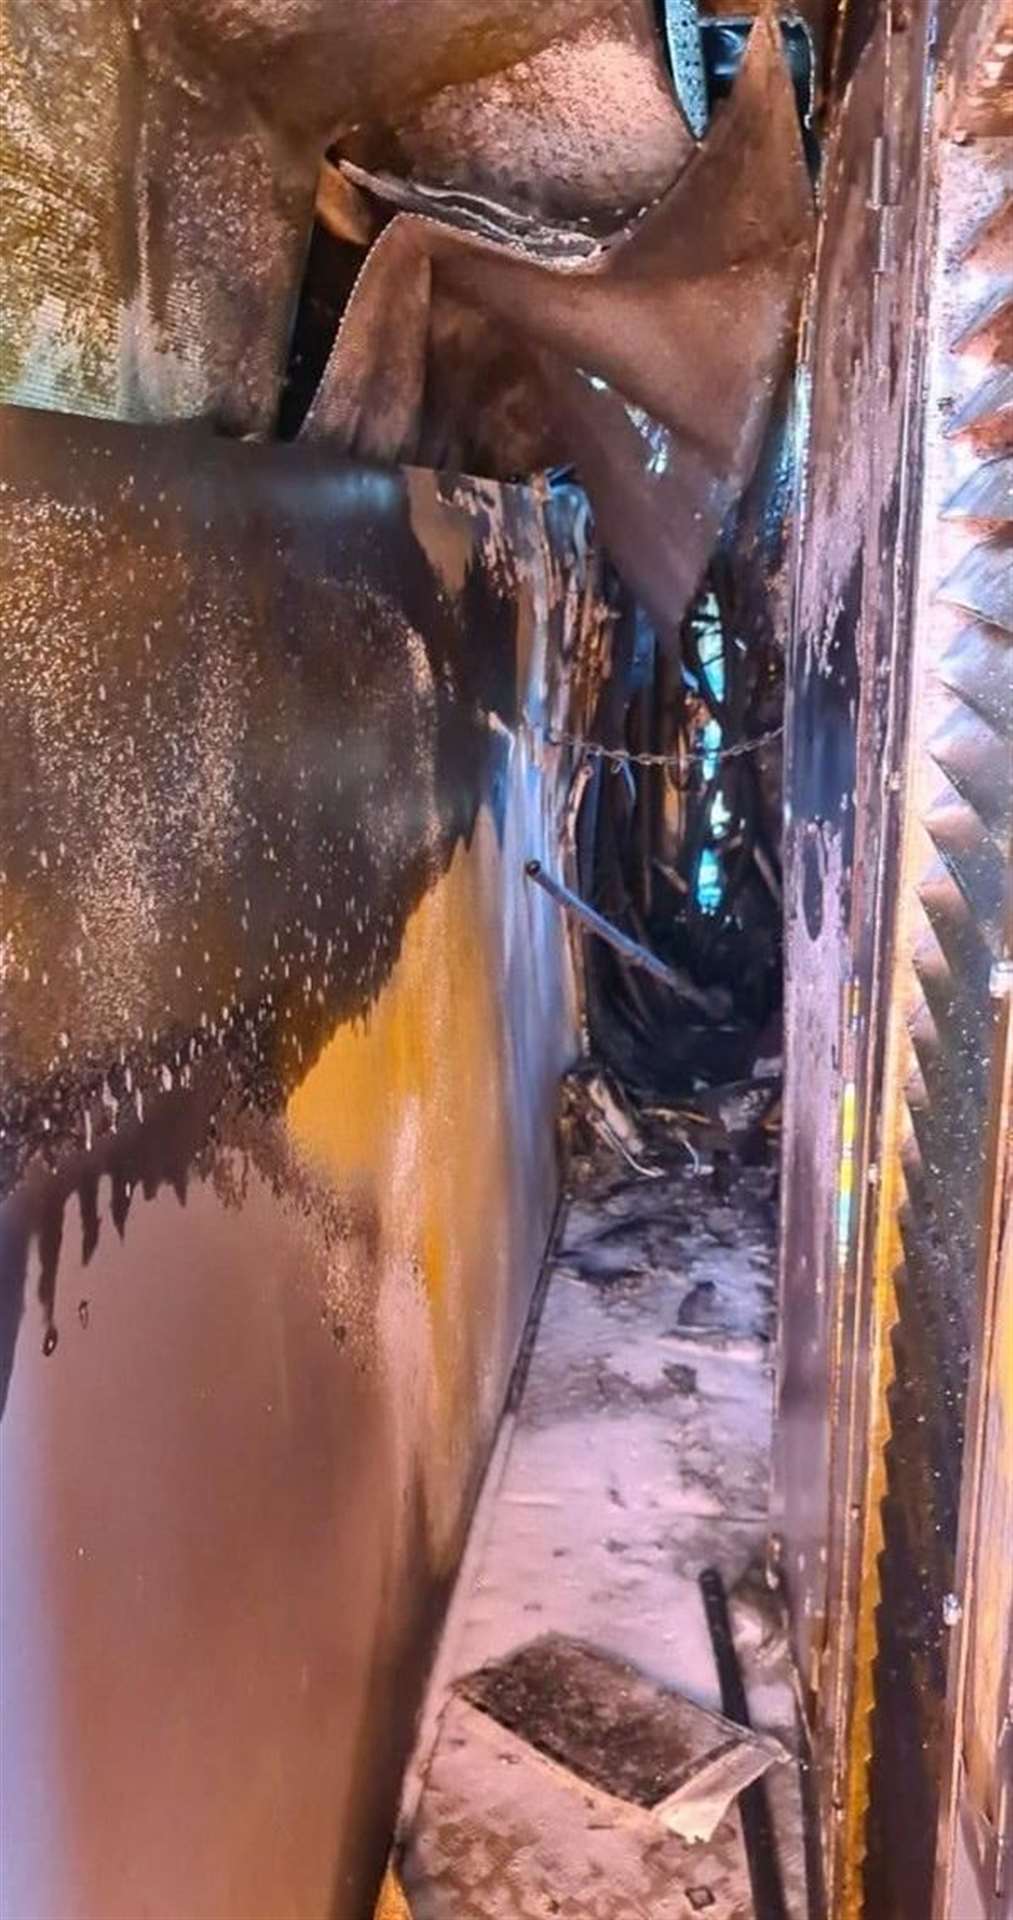 The inside of the freight train that caught fire between Orpington and Sevenoaks